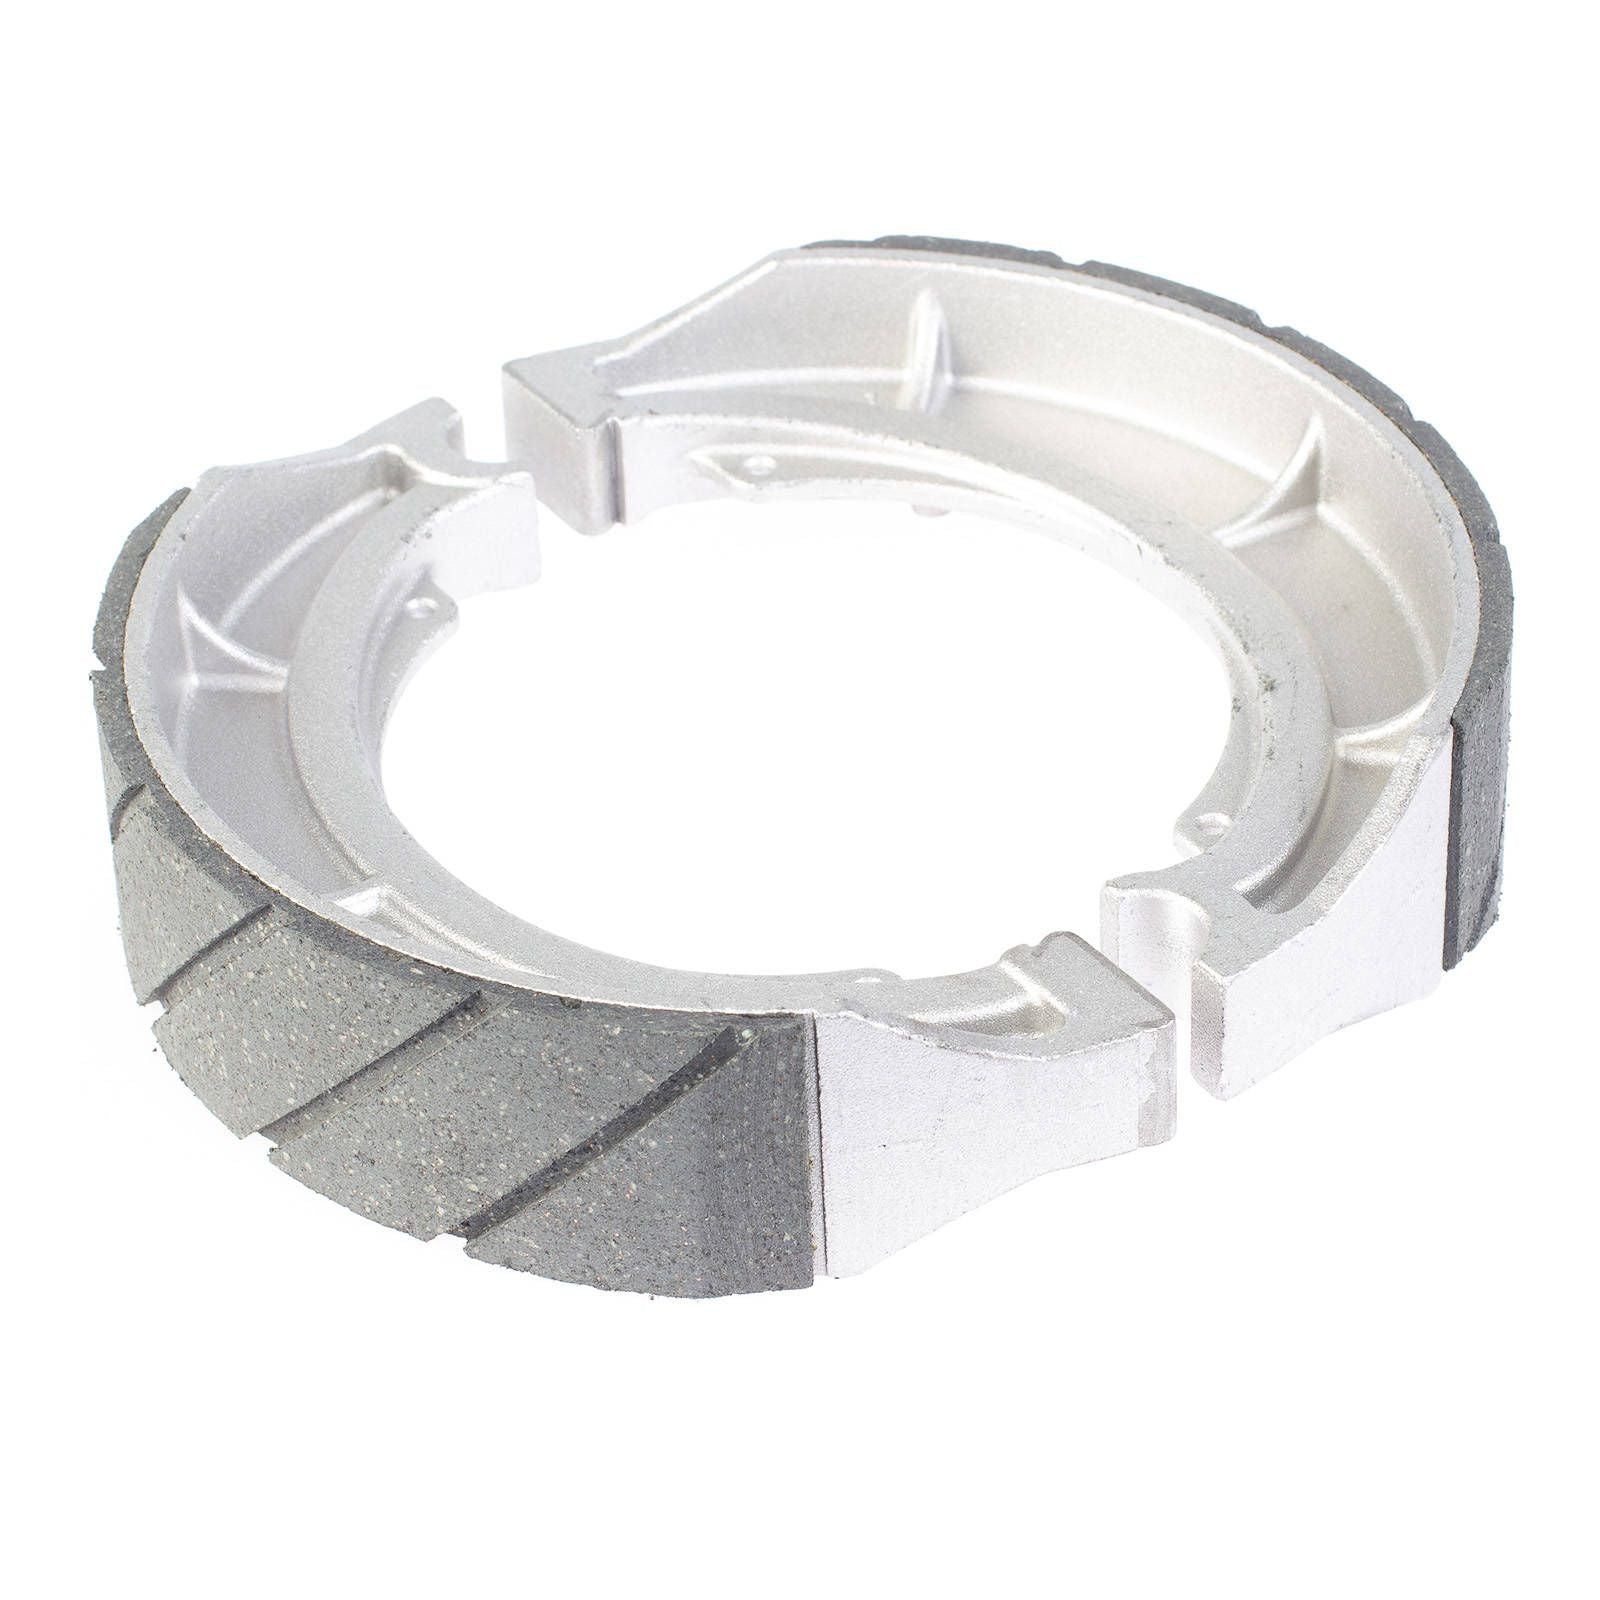 New WHITES Motorcycle Brake Shoes - Water Groove #WPBS41057